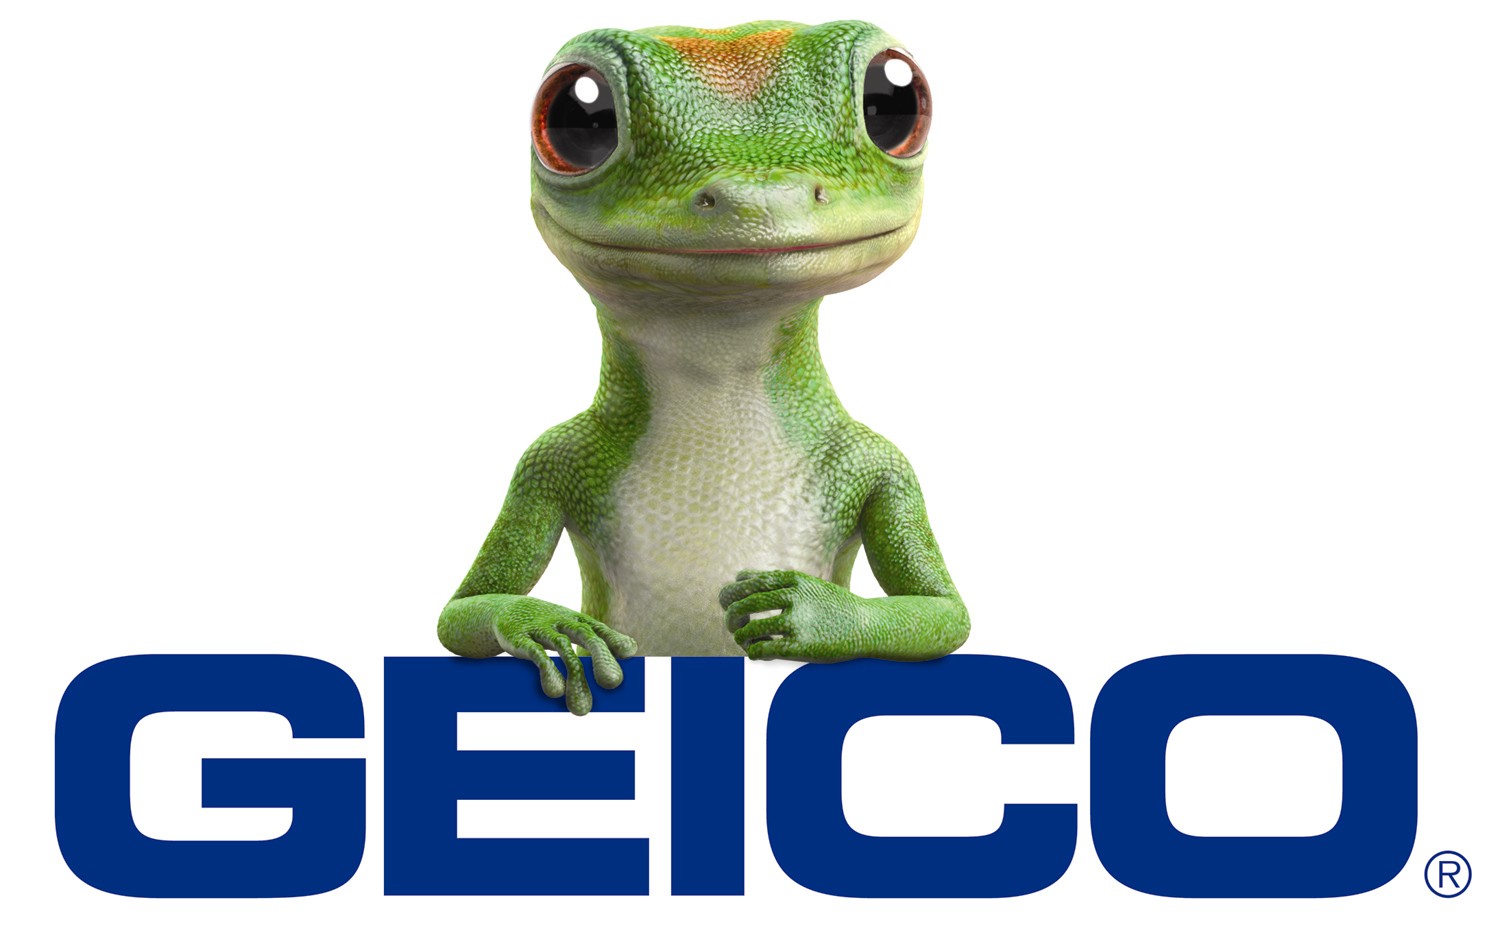 geico gecko and content marketing with a book